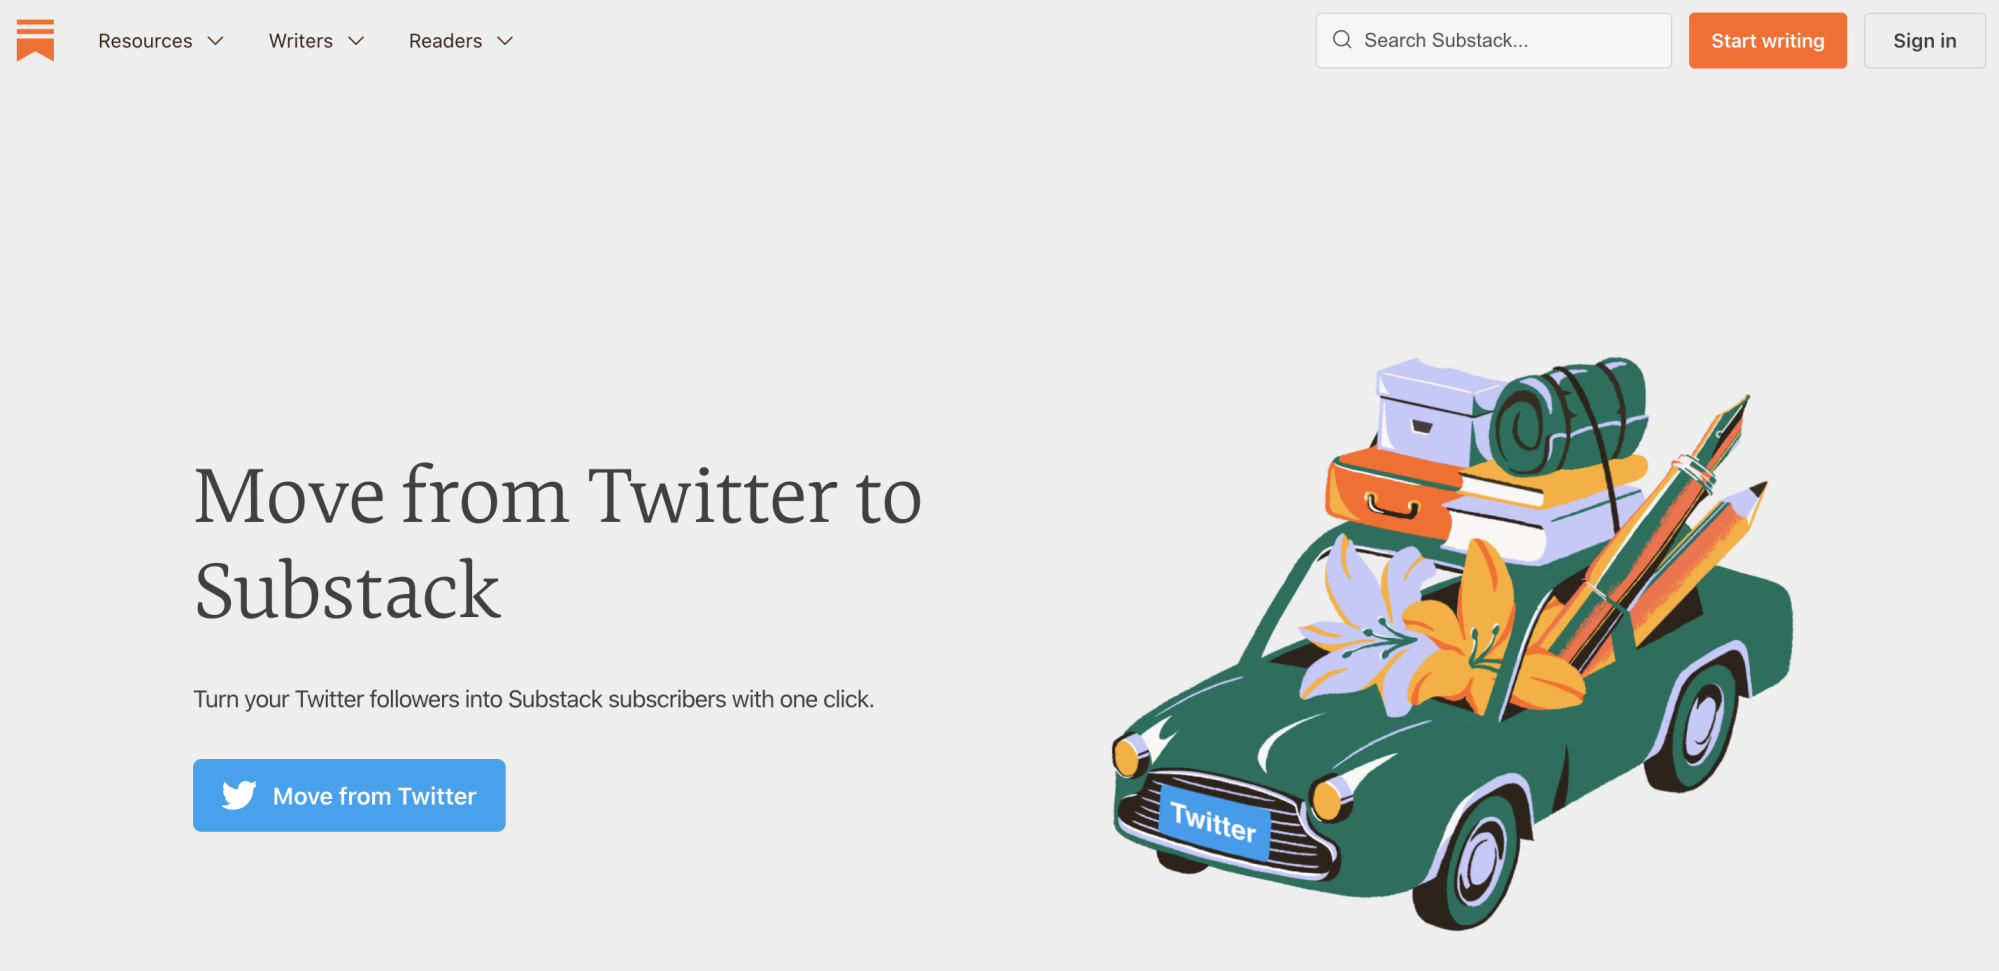 A screenshot of Substack's page with the words "Move from Twitter to Substack".